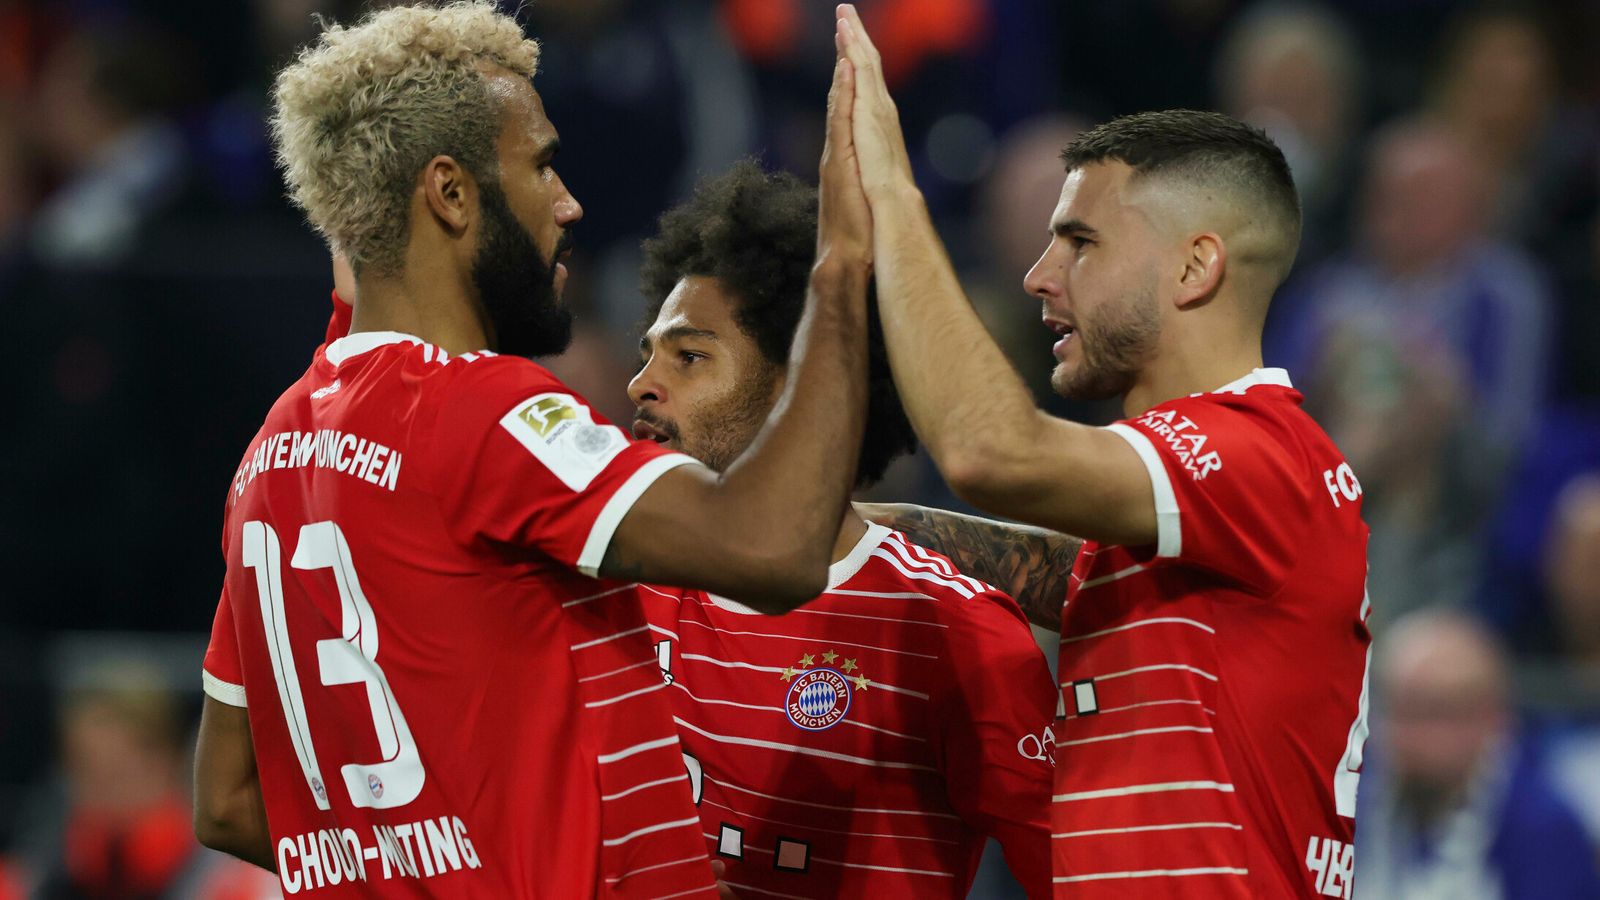 Euro round-up: Bayern Munich top of Bundesliga going into winter break as Napoli win 11th straight league game